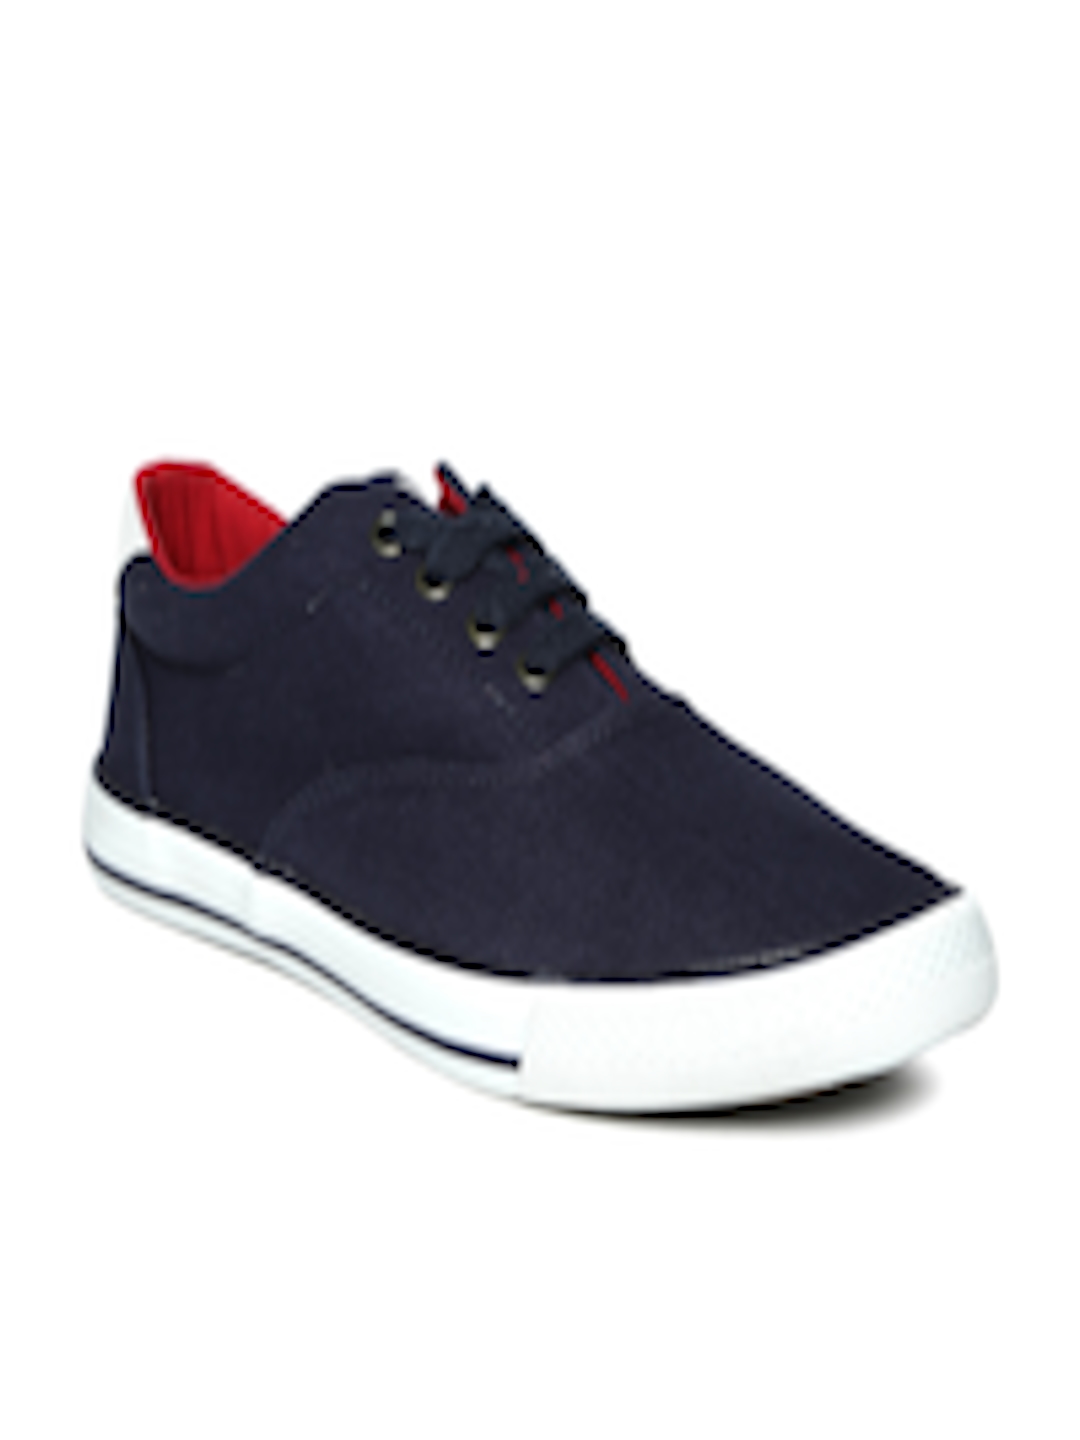 Buy Roadster Men Navy Canvas Shoes - Casual Shoes for Men 1095382 | Myntra